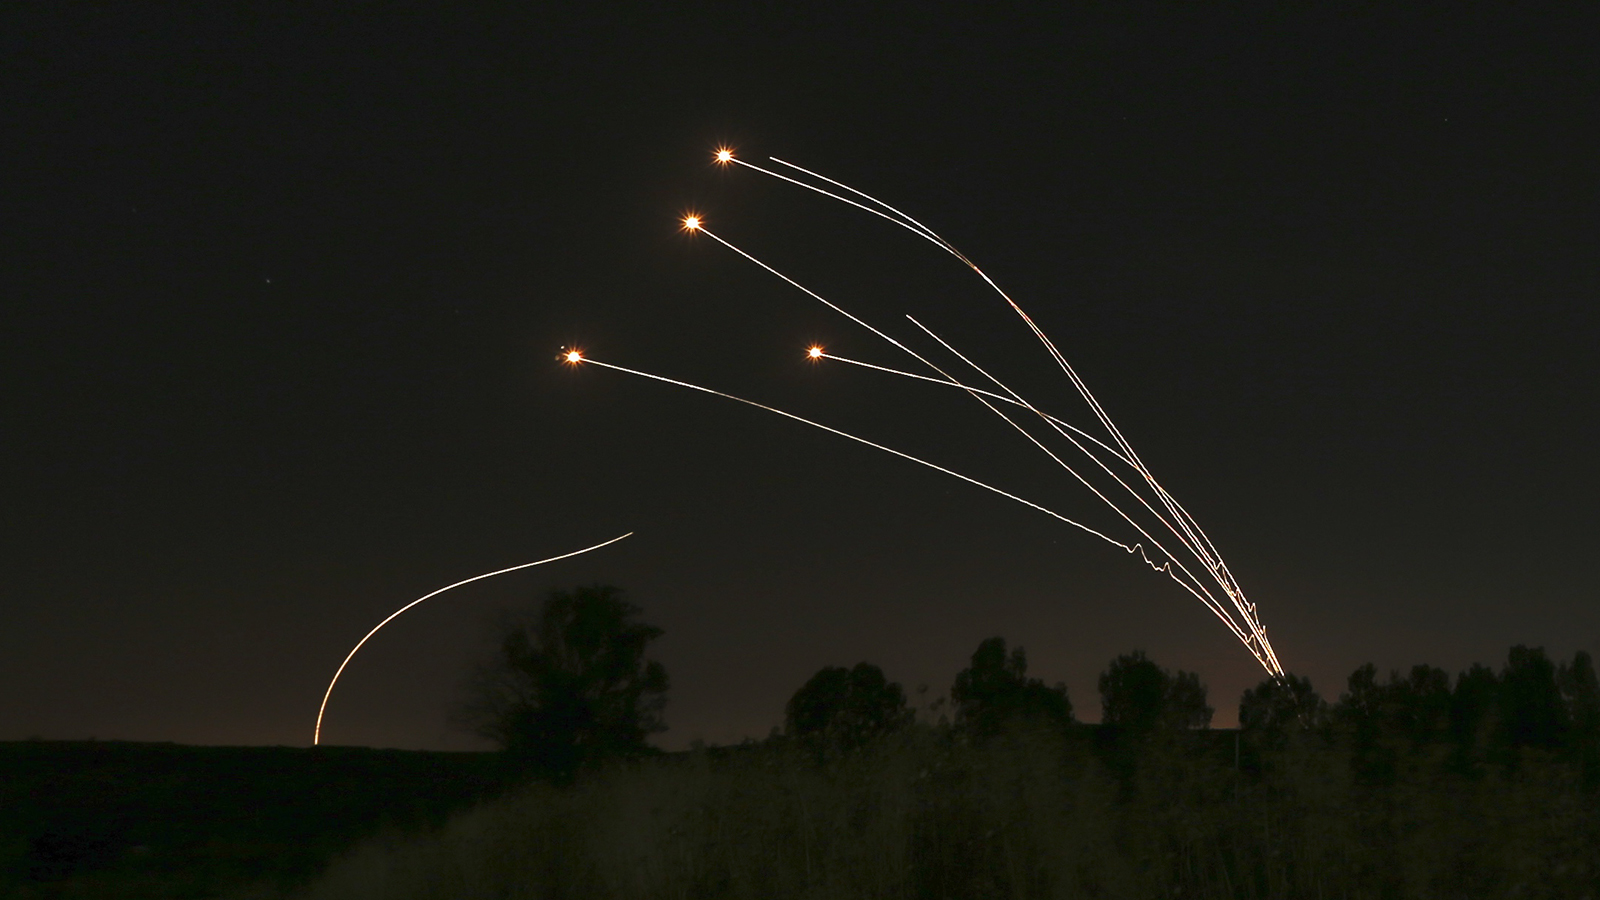 In this May 4, 2019, file photo, Israeli air defense system Iron Dome takes out rockets fired from Gaza near Sderot, Israel. The Israeli Defense Ministry said March 16, 2021, that the Iron Dome air defense system has been upgraded and is now capable for intercepting rocket and missile salvos as well as simultaneous attacks by unmanned aerial vehicles. (AP Photo/Ariel Schalit, File)